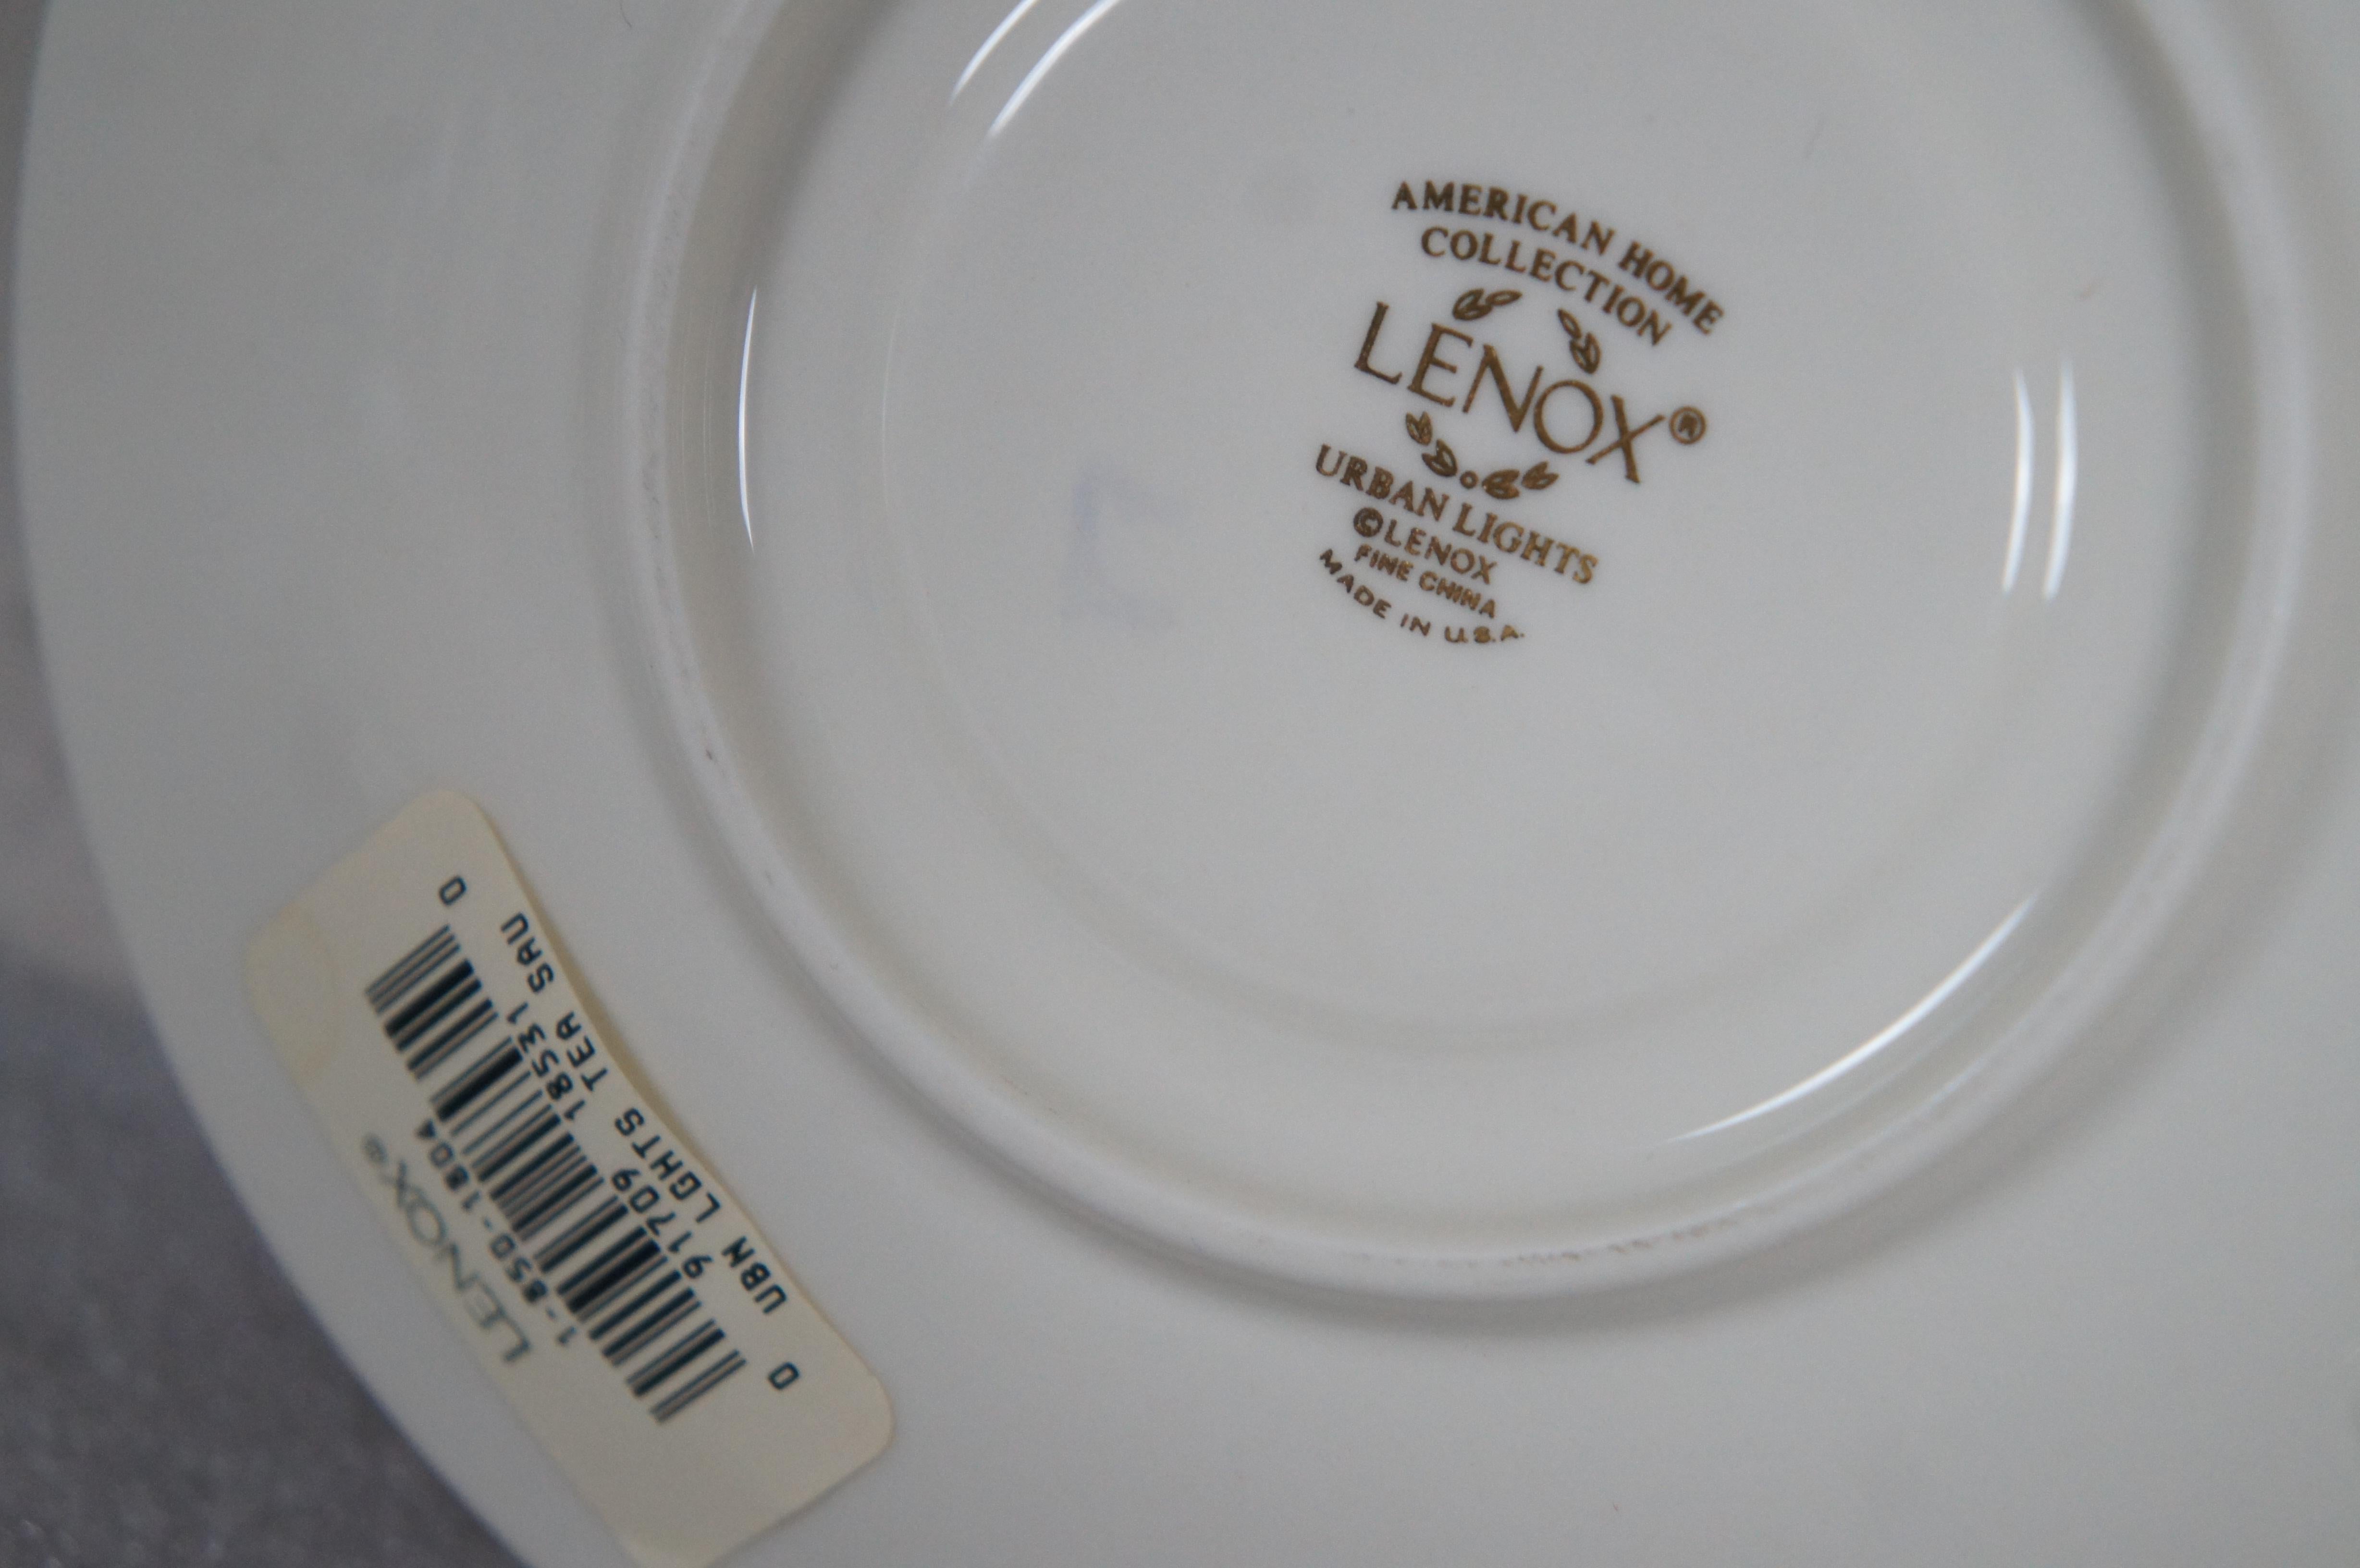 72 Pc Lenox Urban Lights American Home Collection Dinnerware China Serving Set For Sale 7